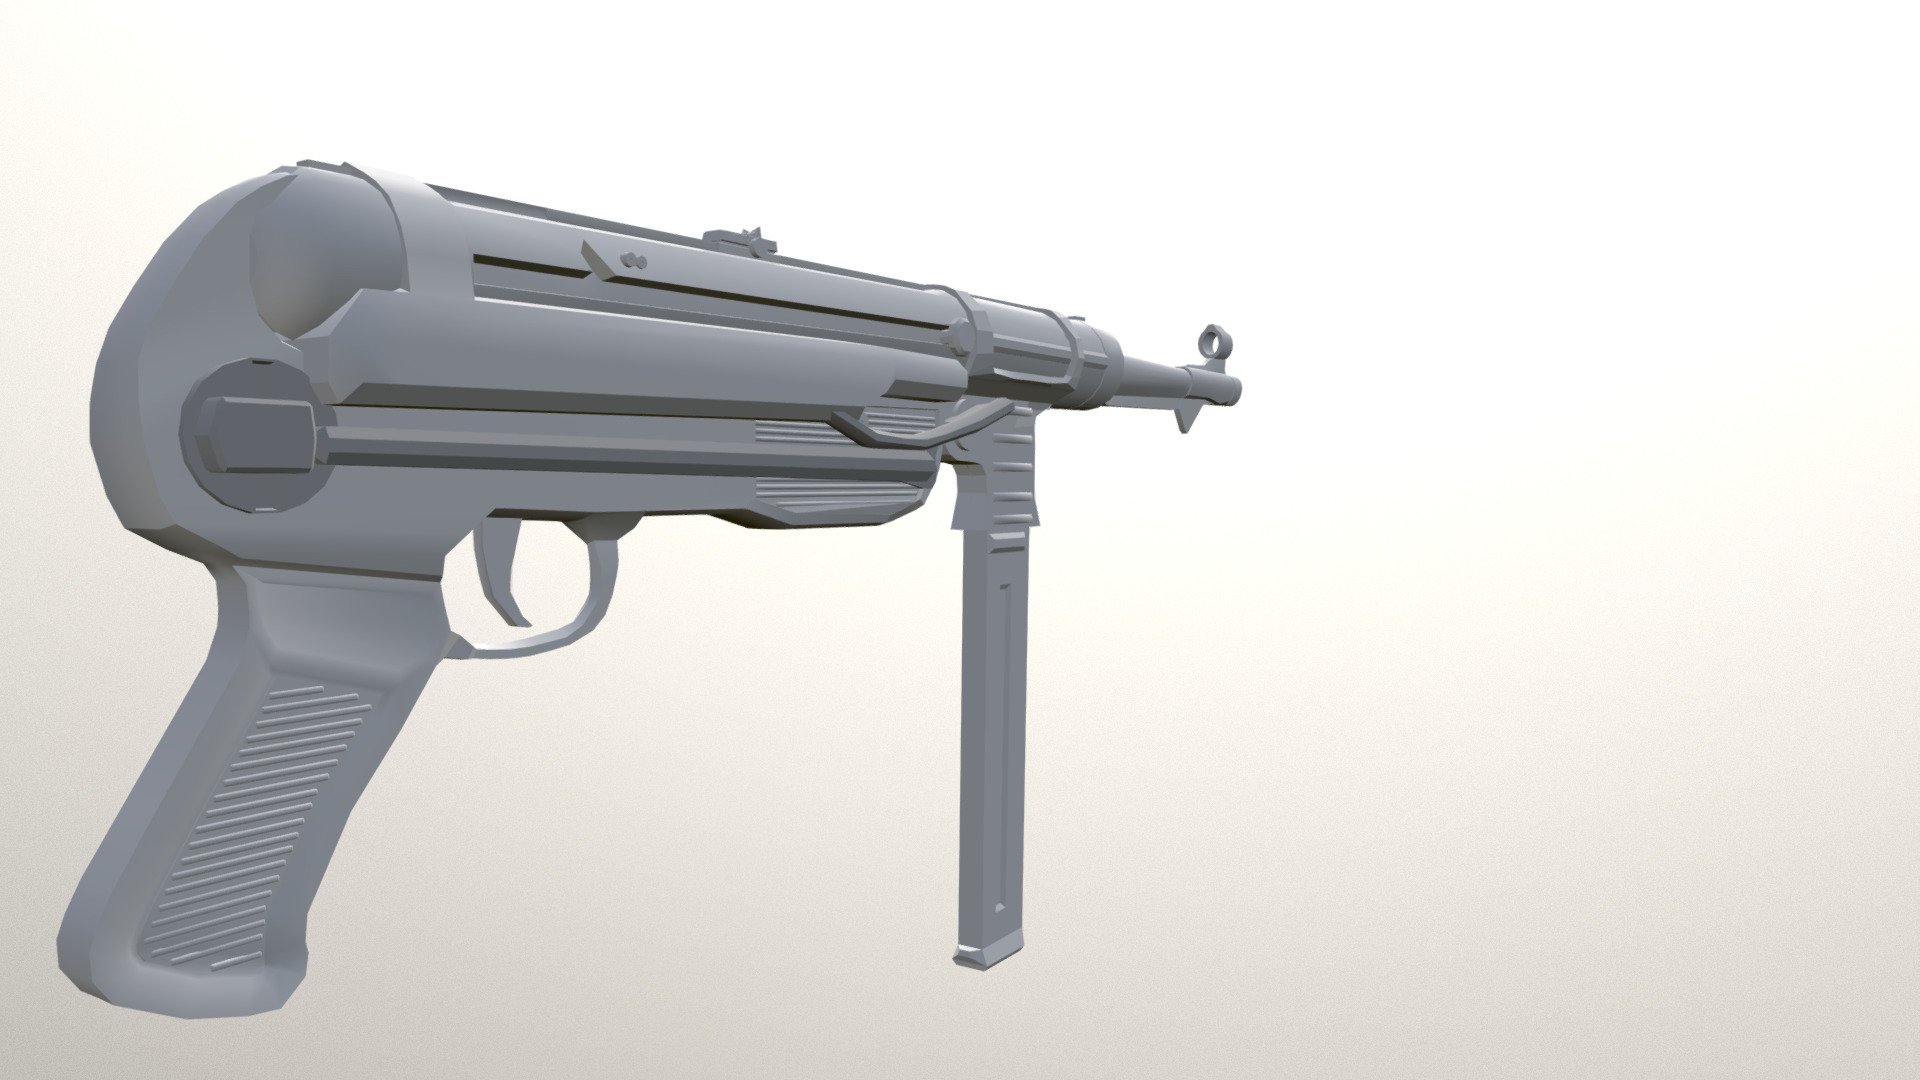 MP40 Weapon